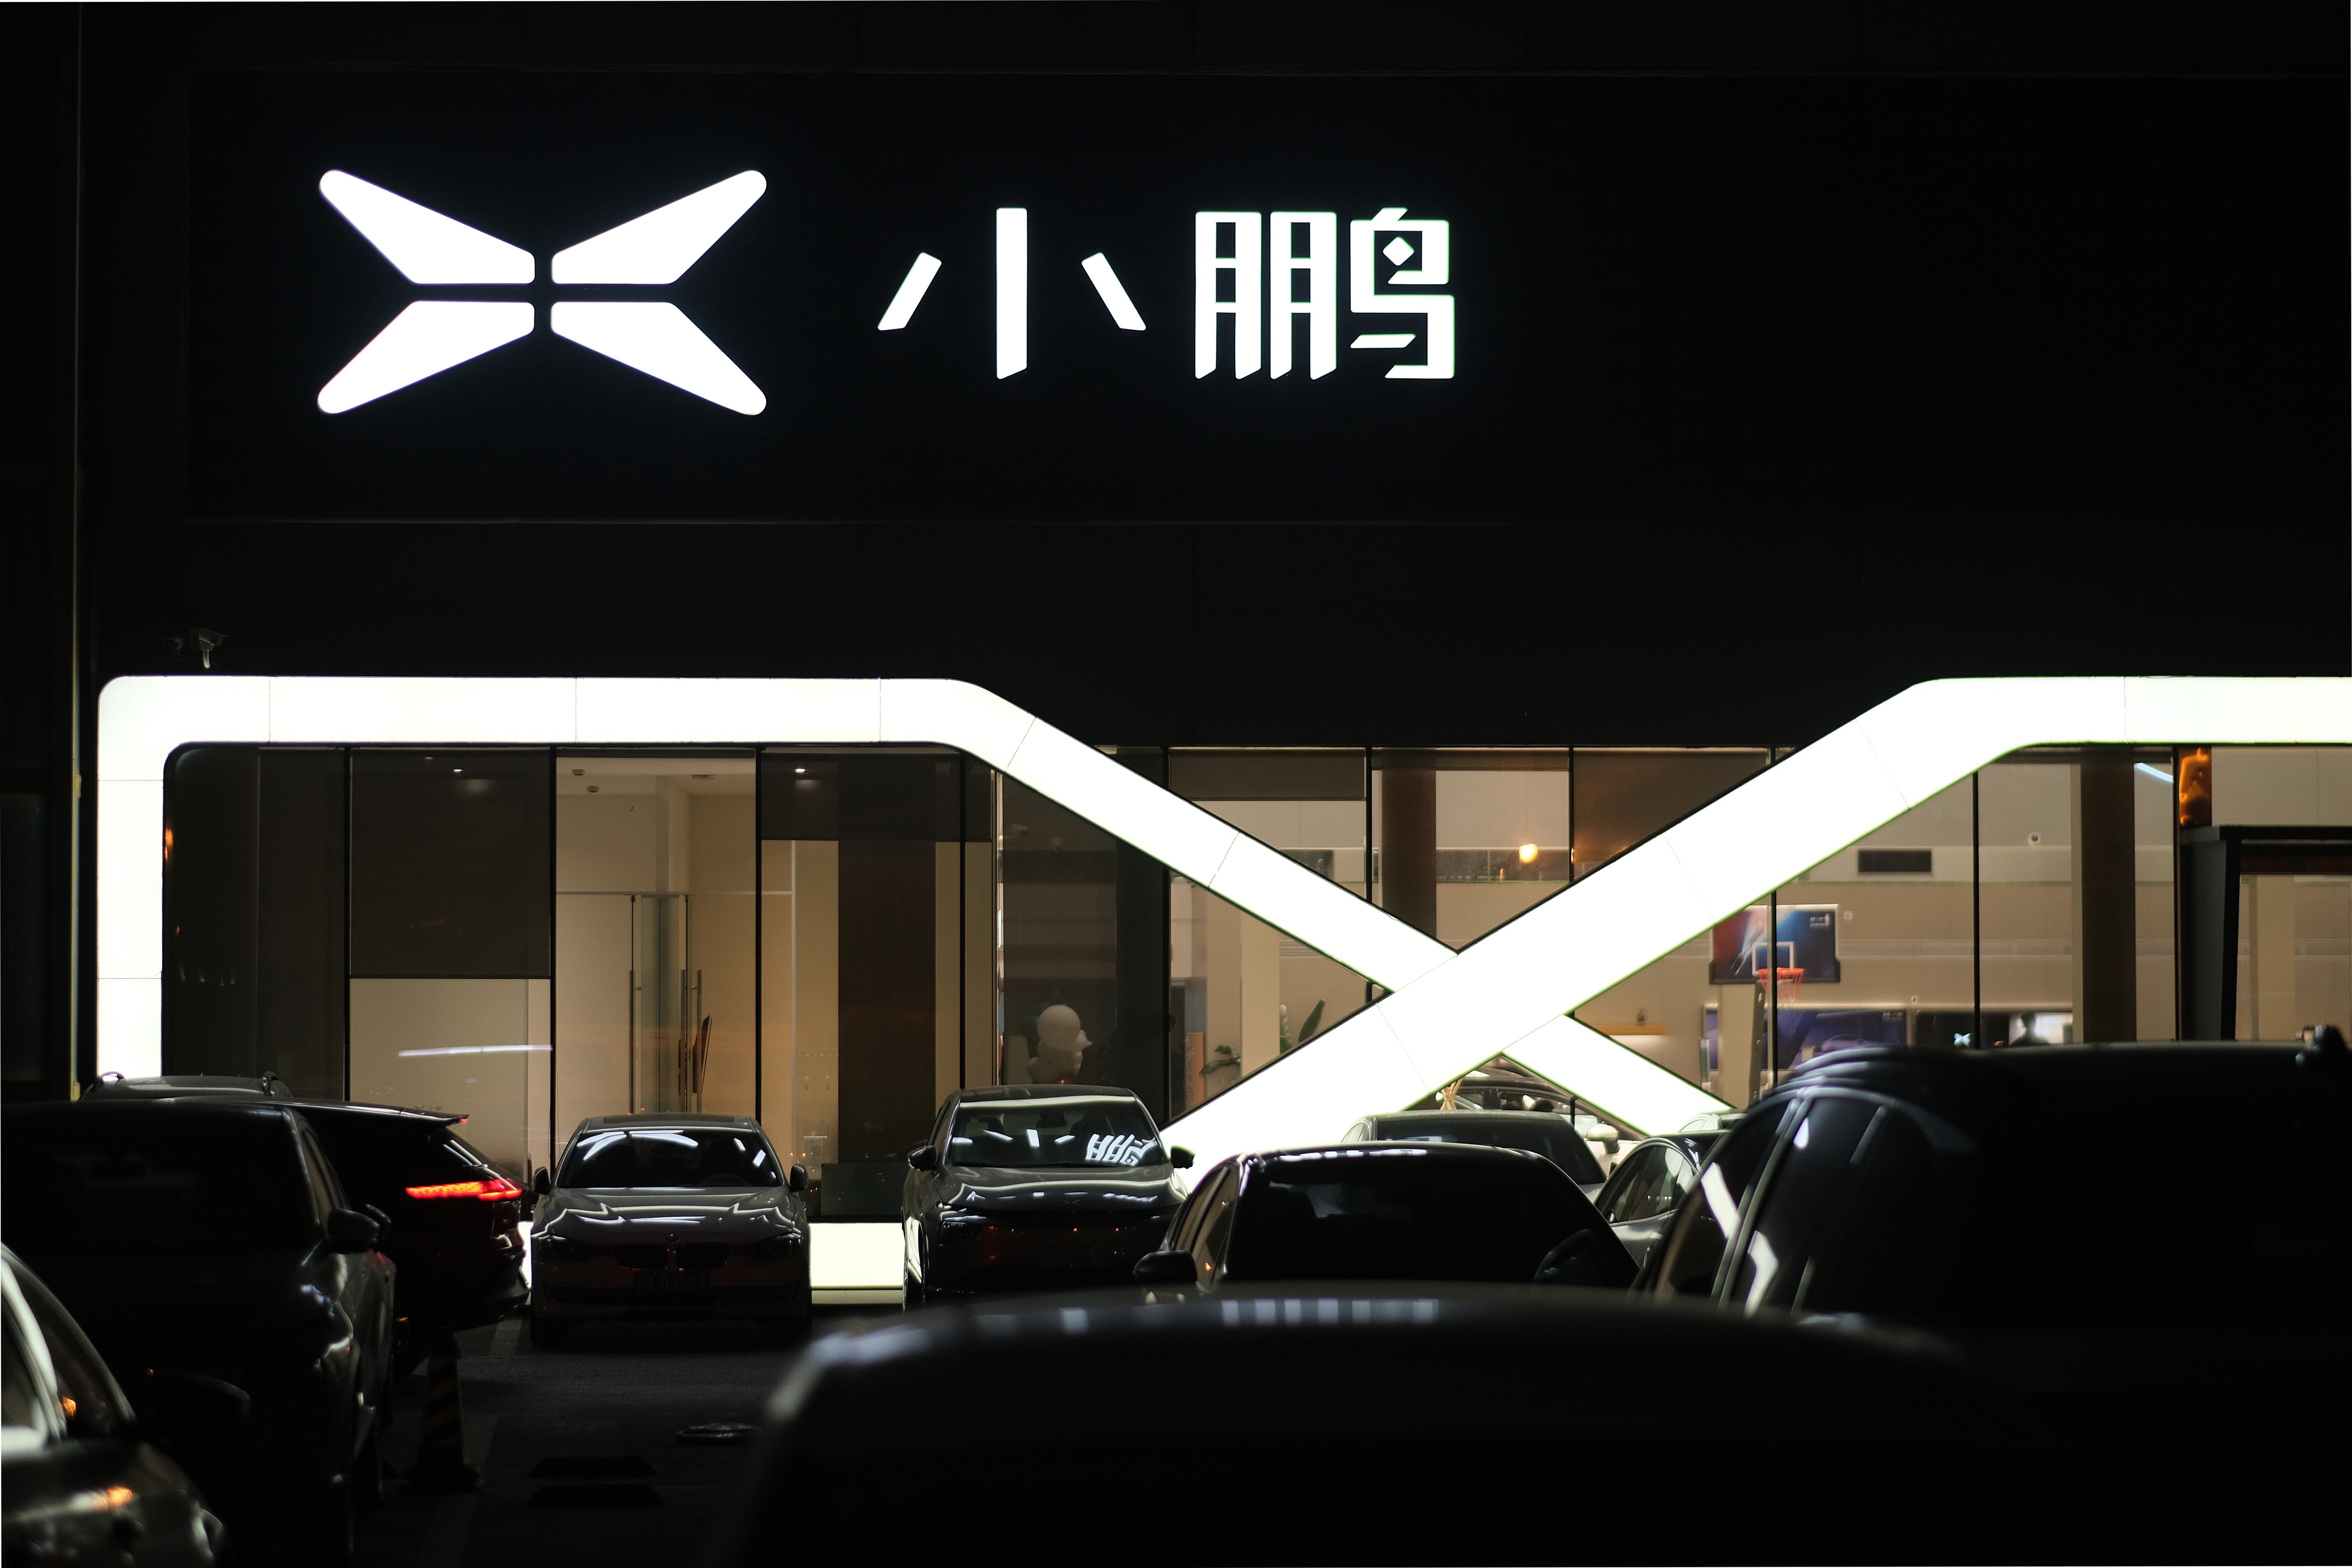 Cathie Wood-Backed Tesla Rival Xpeng Gets A 7% Lower Price Target But Why Analyst Is Still Bullish